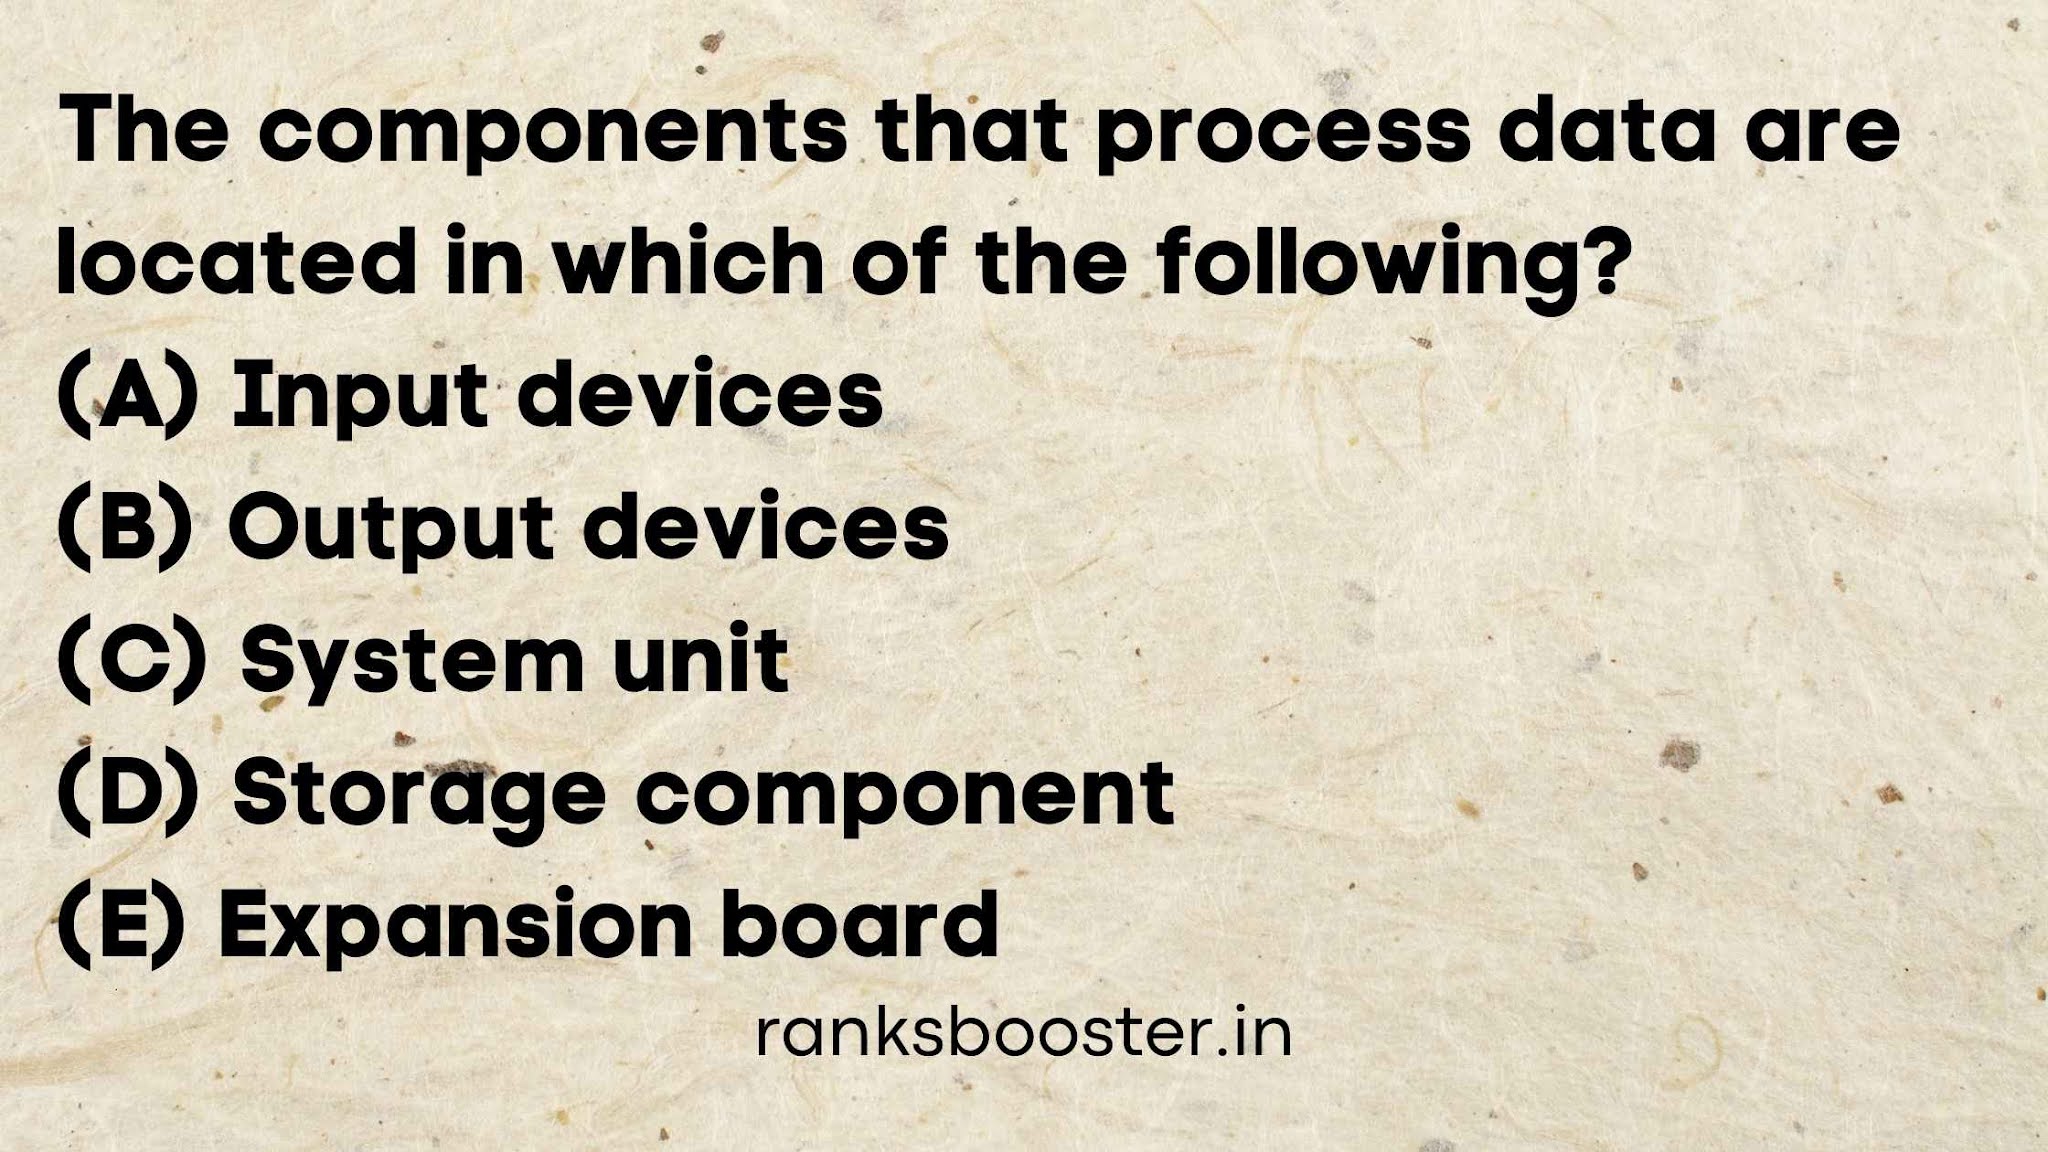 The components that process data are located in which of the following?